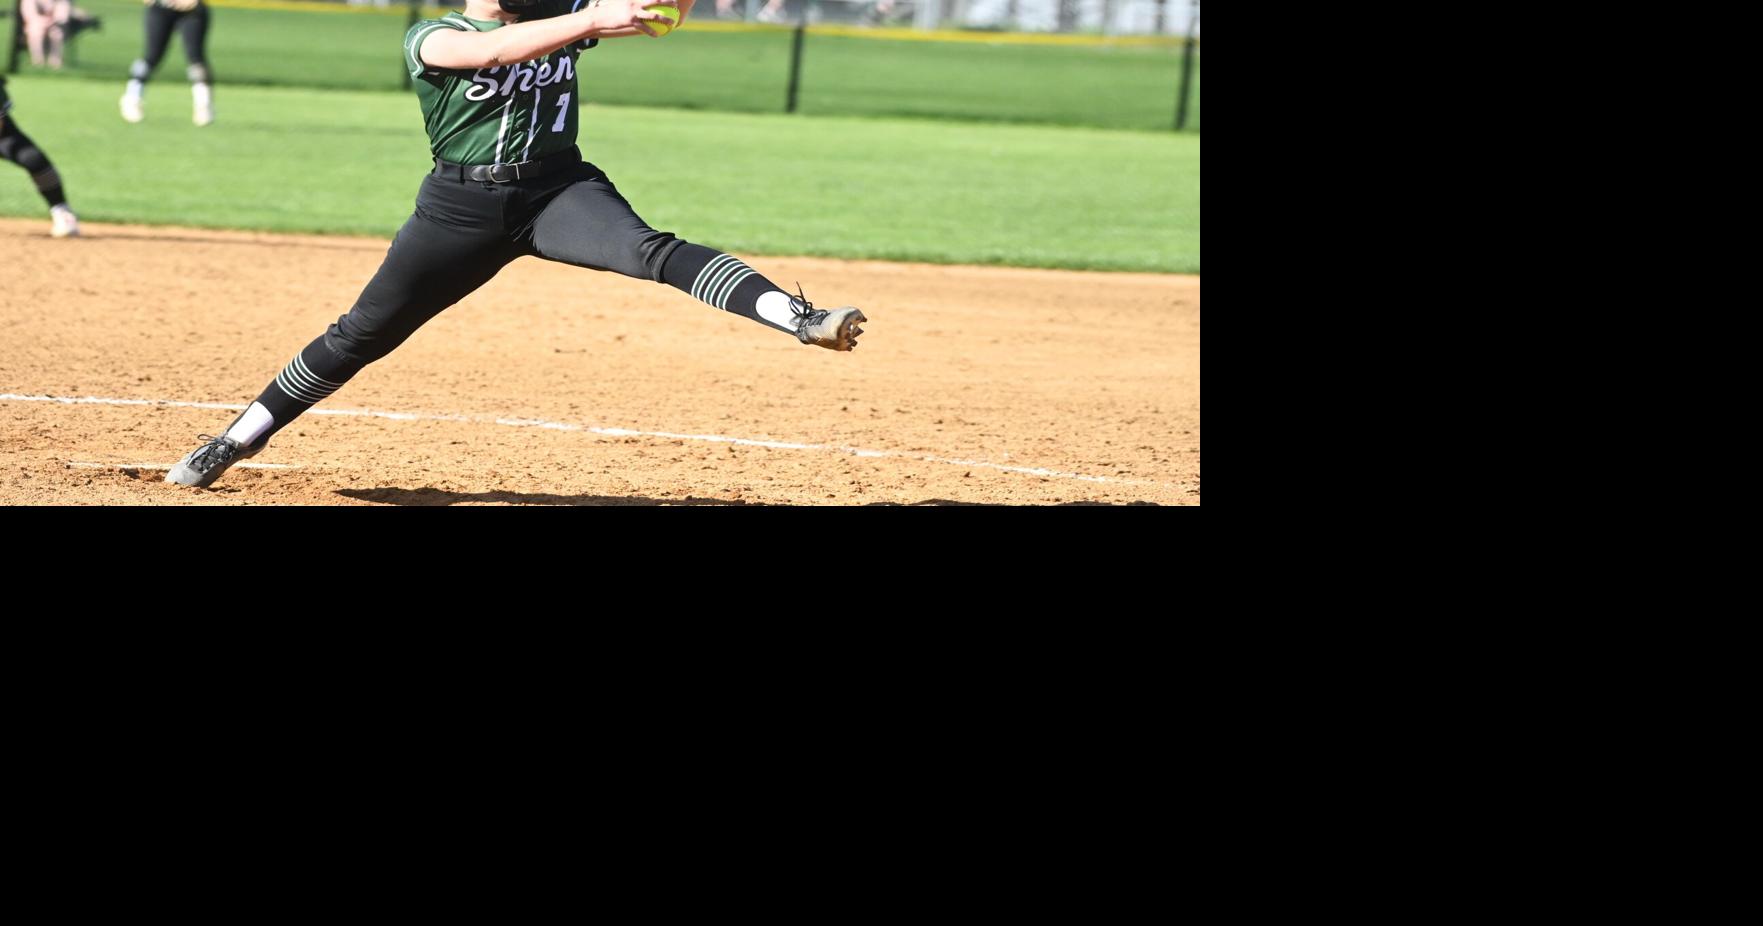 Bre Hayes No-Hits Ballston Spa, Leads Shenendehowa to 1-0 Victory in Section 2 Softball Clash